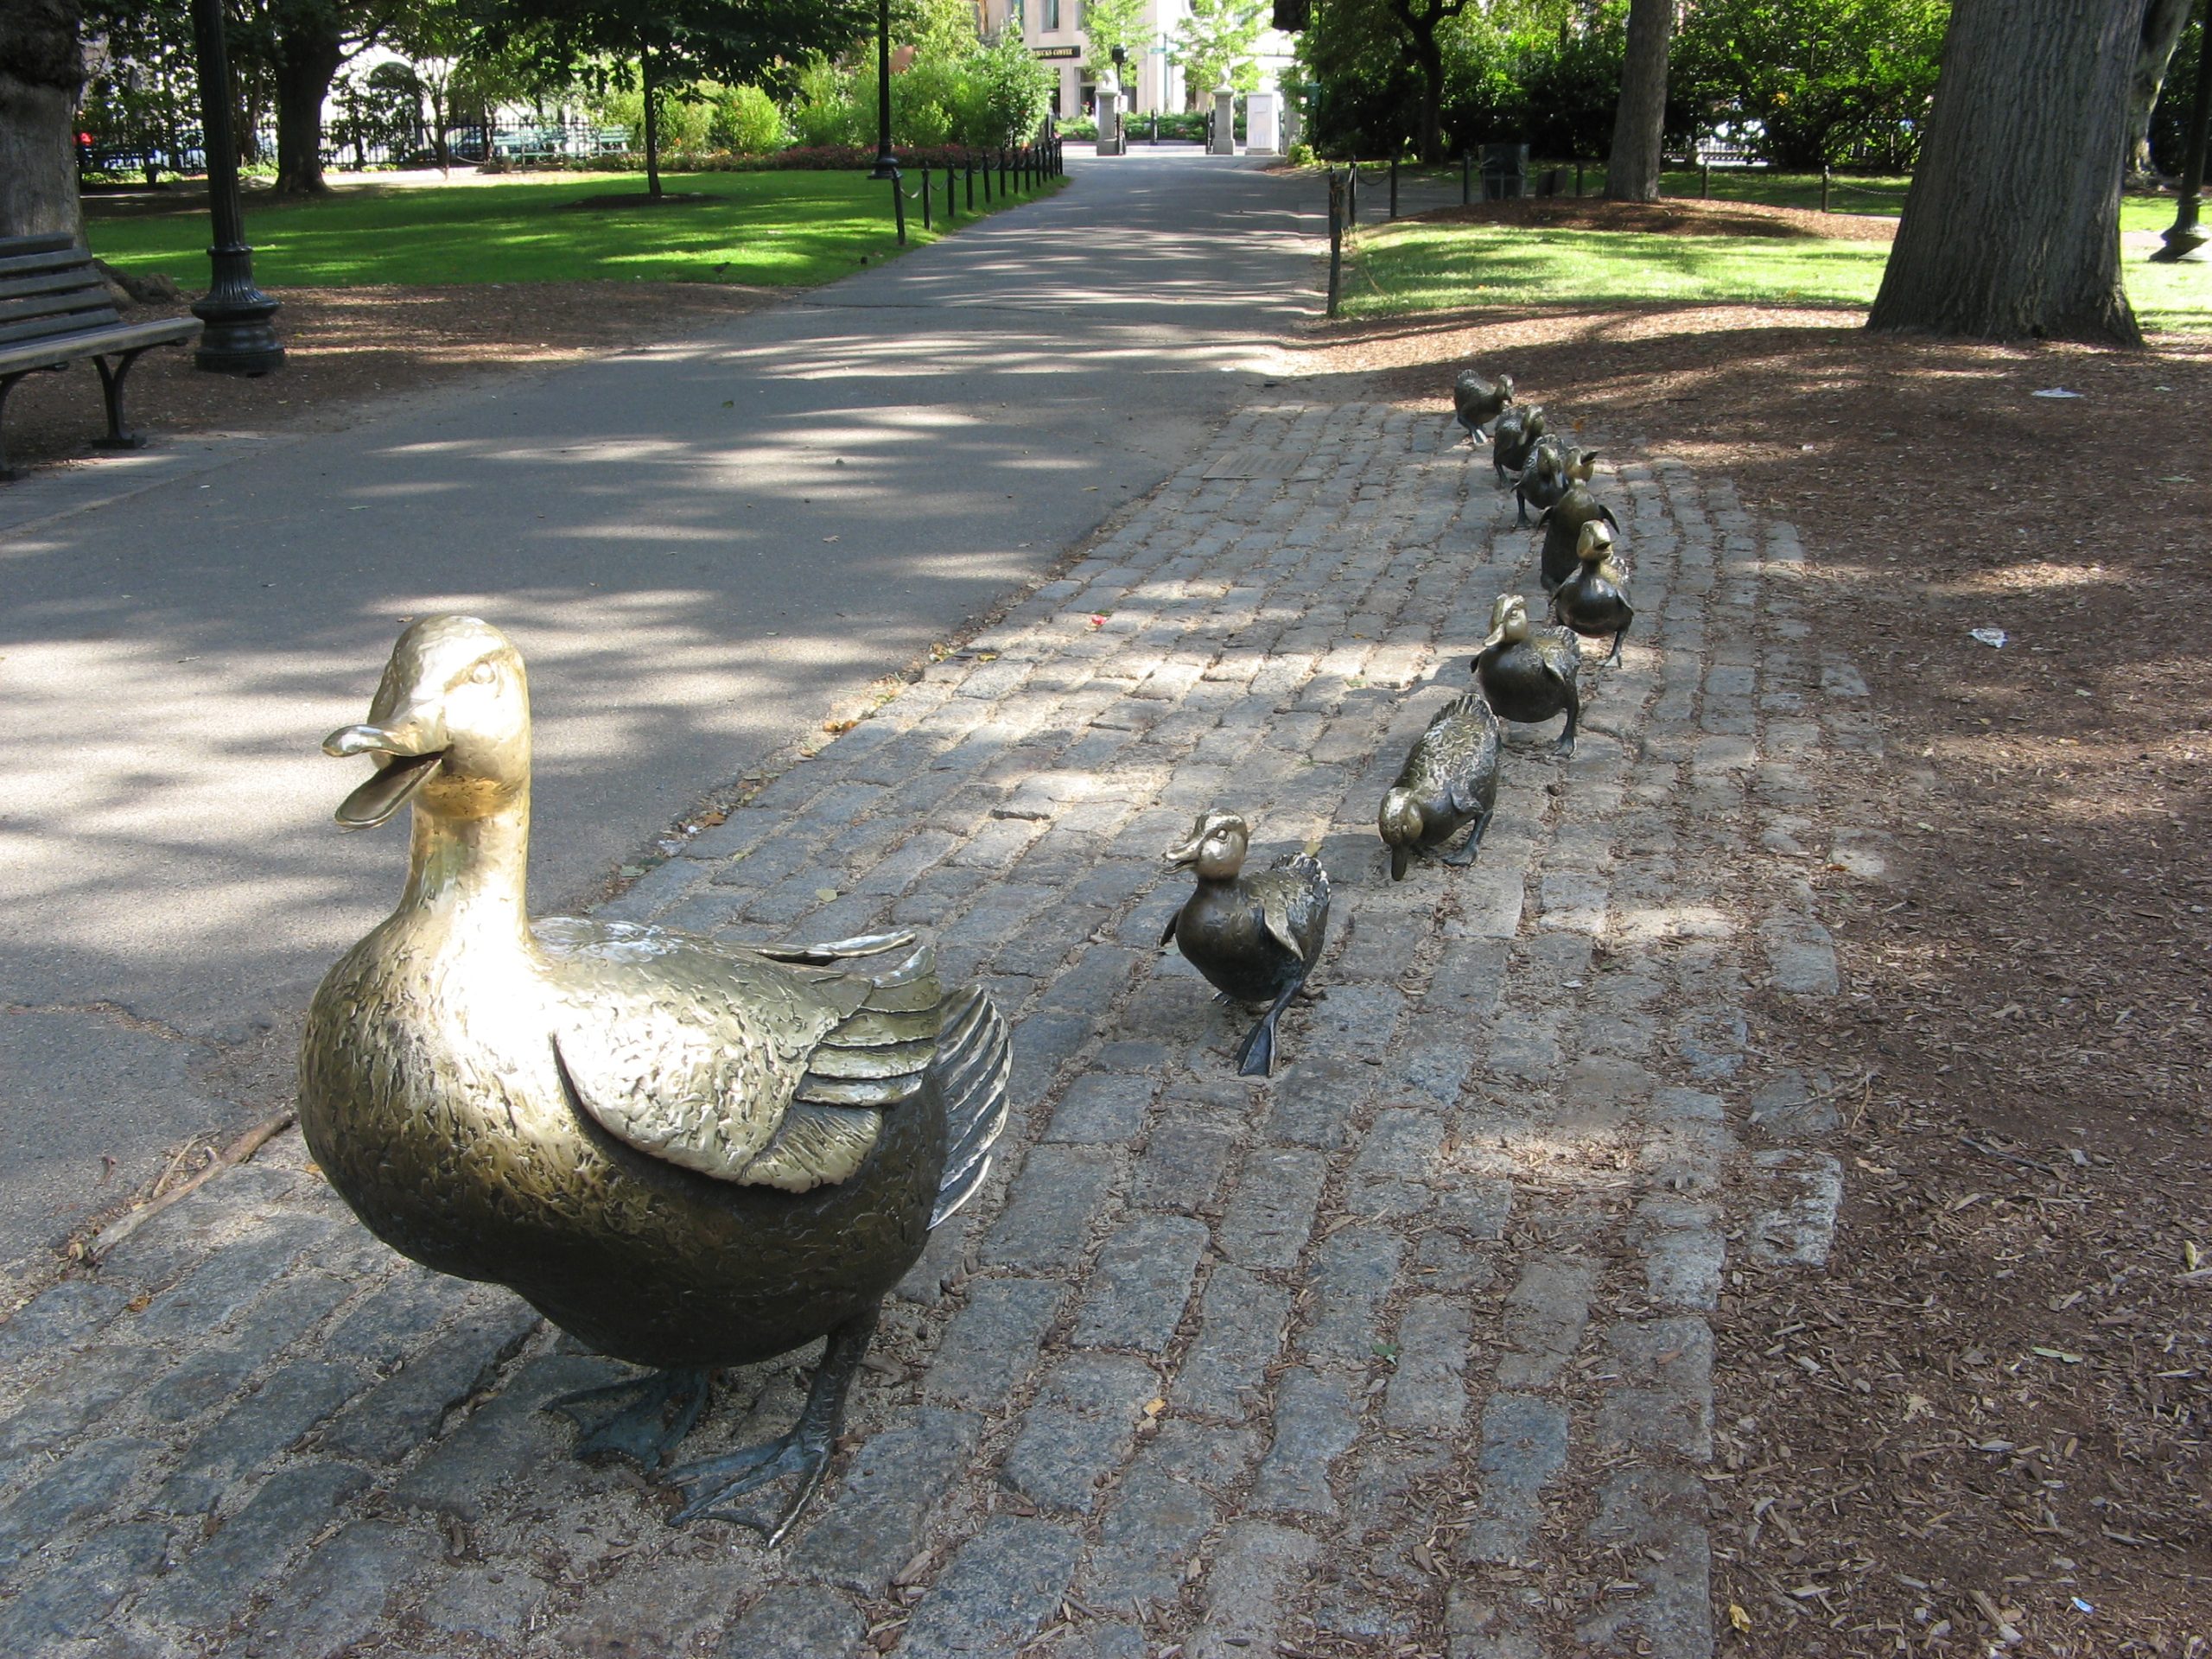 Make Way For The Ducklings (user submitted)